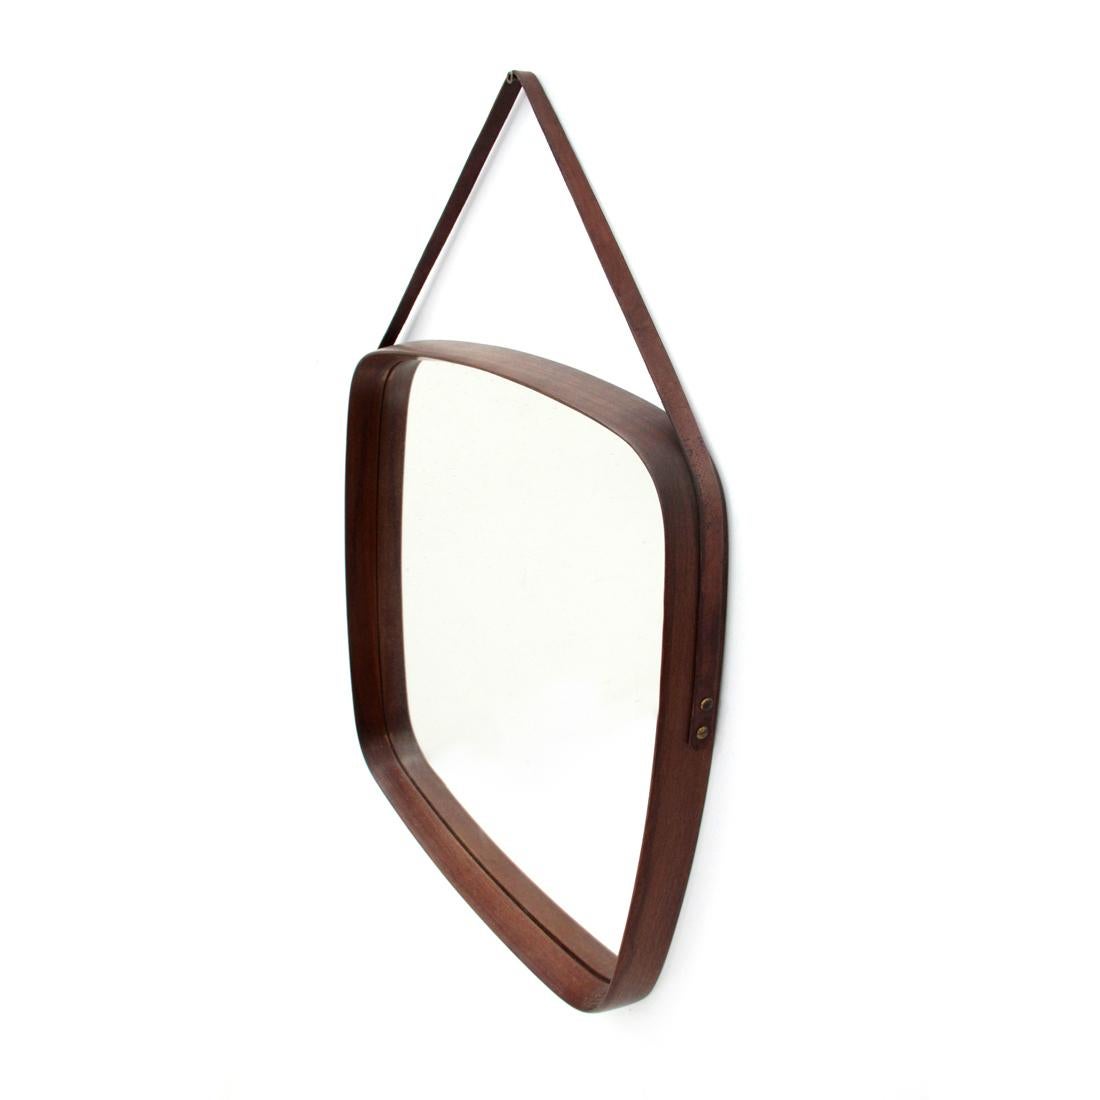 Italian manufacturing mirror produced in the 1960s.
Square wooden frame with rounded corners.
Mirror glass surface.
Leather cord.
Good general condition, some signs due to normal use over time.

Dimensions: Length 52 cm, depth 4 cm, height 52